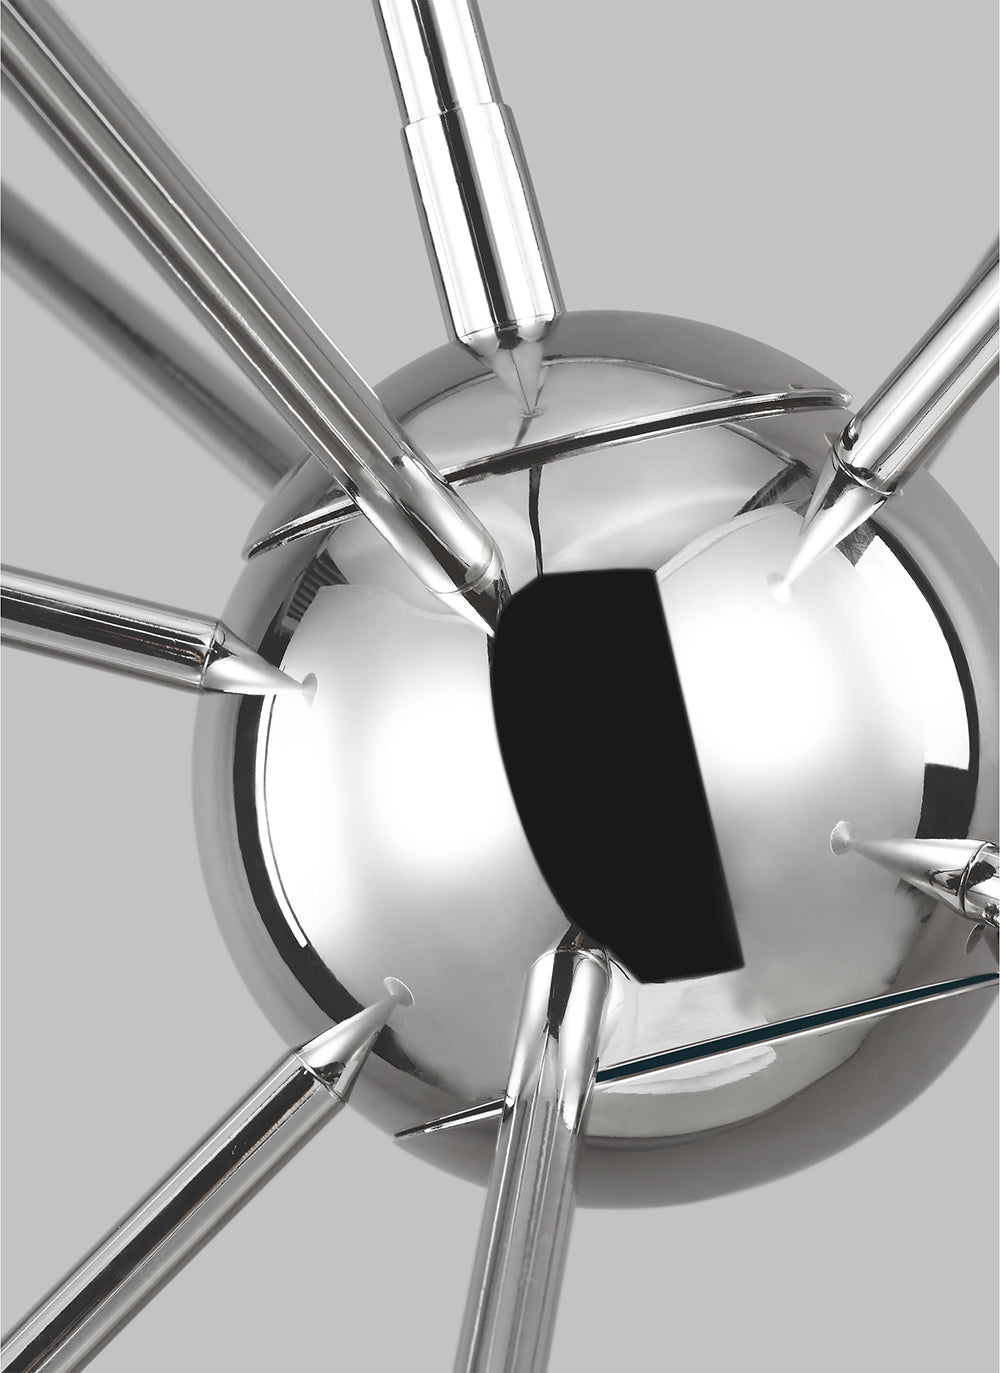 Polished nickel ball and rod details on the modern statement chandelier.